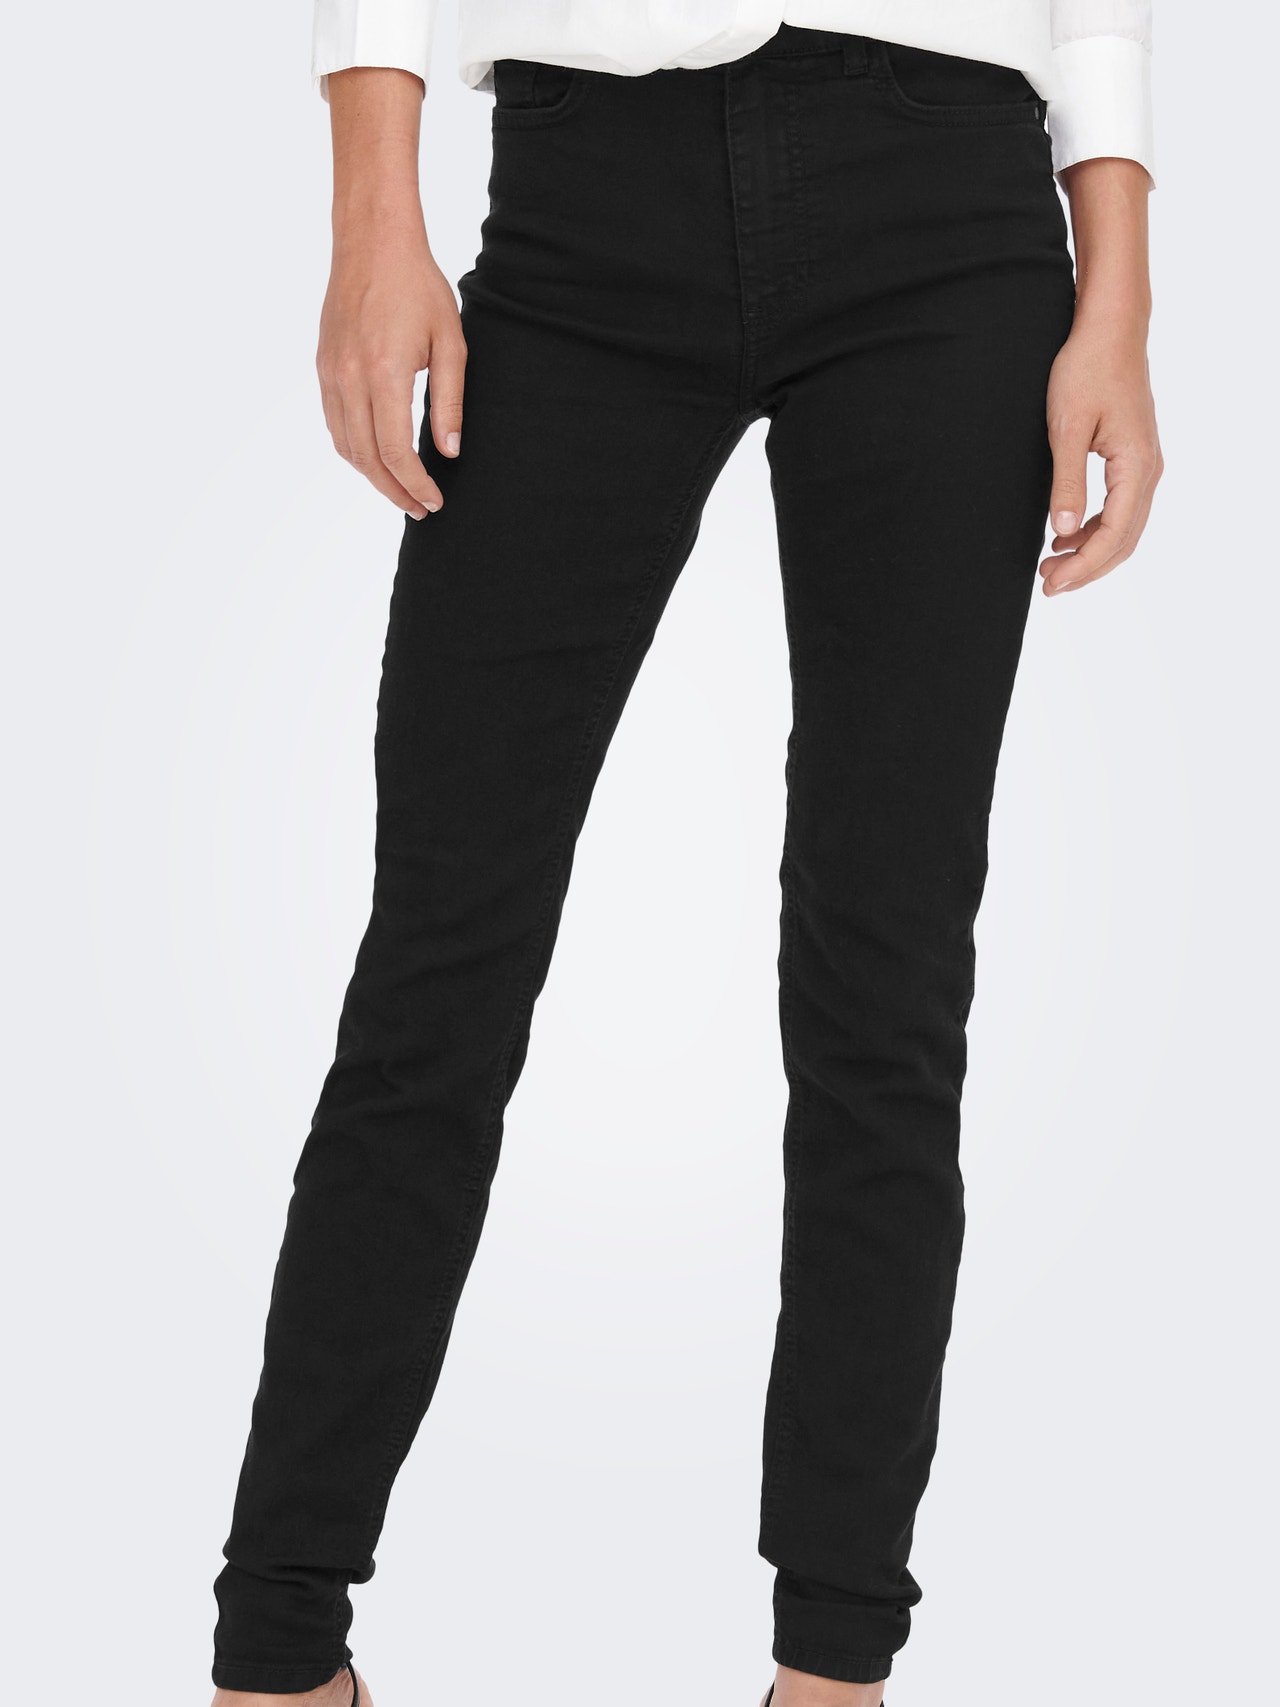 ONLY Skinny fit High waist Jeans -Black - 15278119